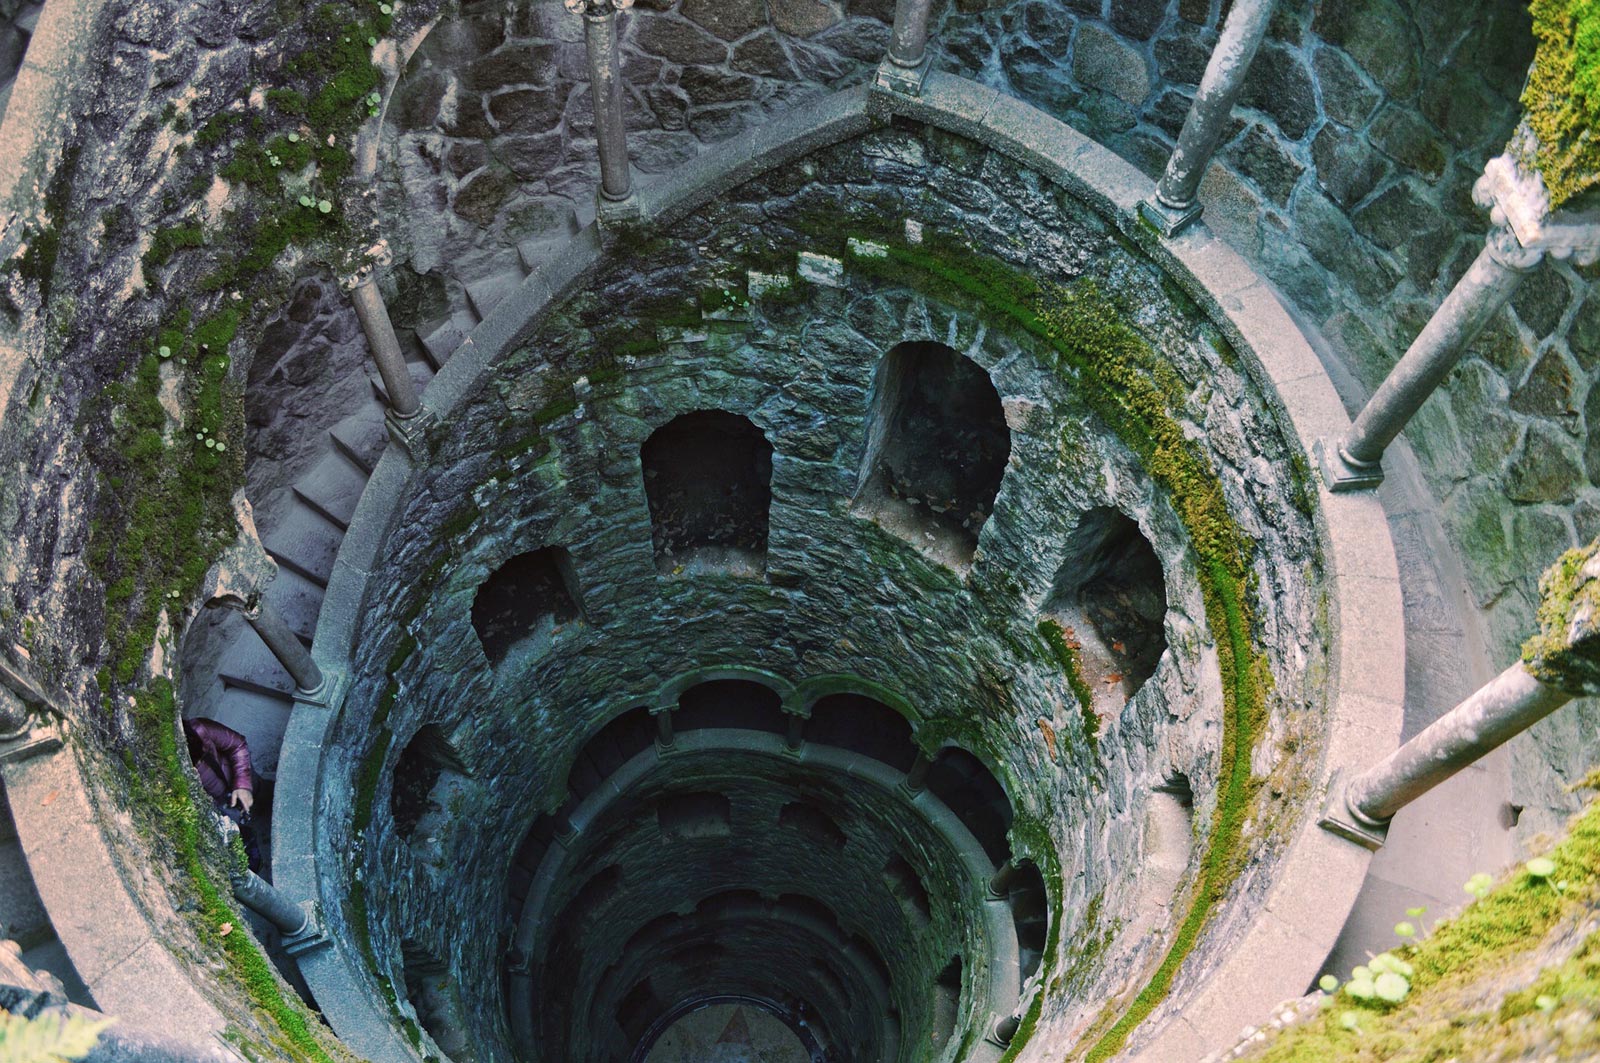 Quinta Da Regaleira Sintra Palaces And Historic Houses Portugal